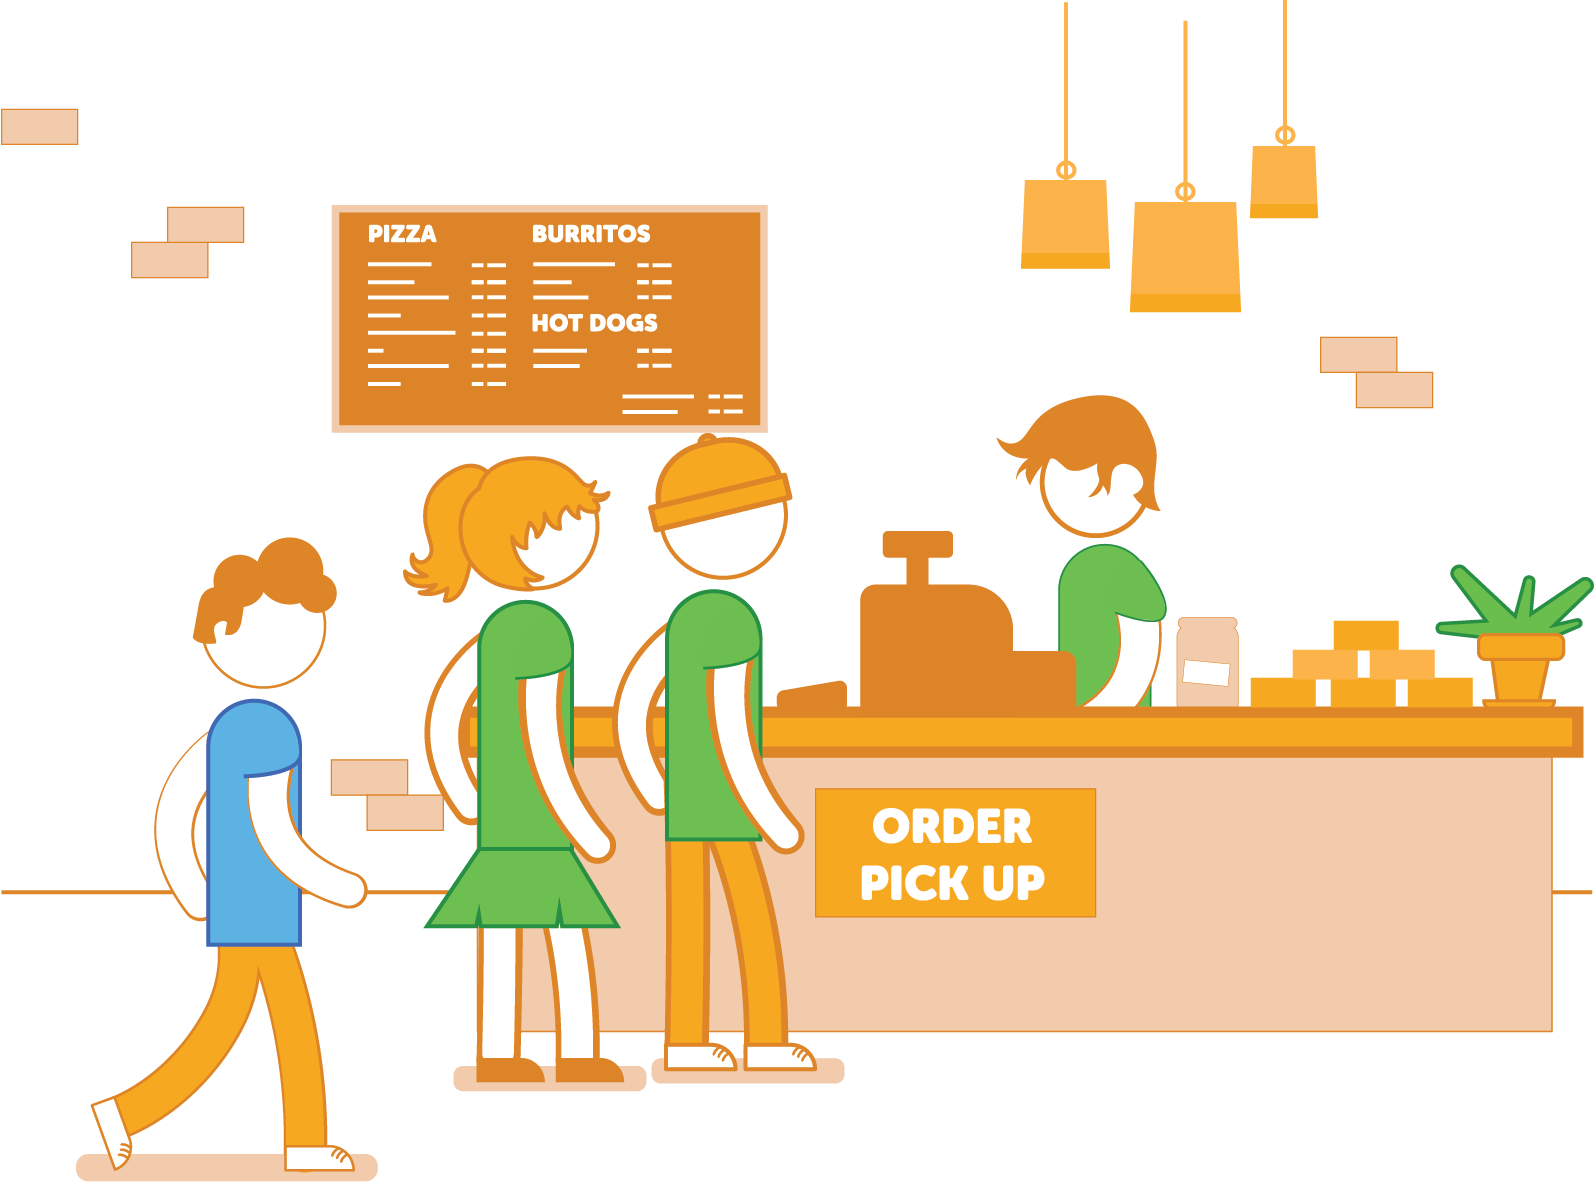 Your Order Will Be Ready When You Arrive - Artificial Intelligence (1594x1182)